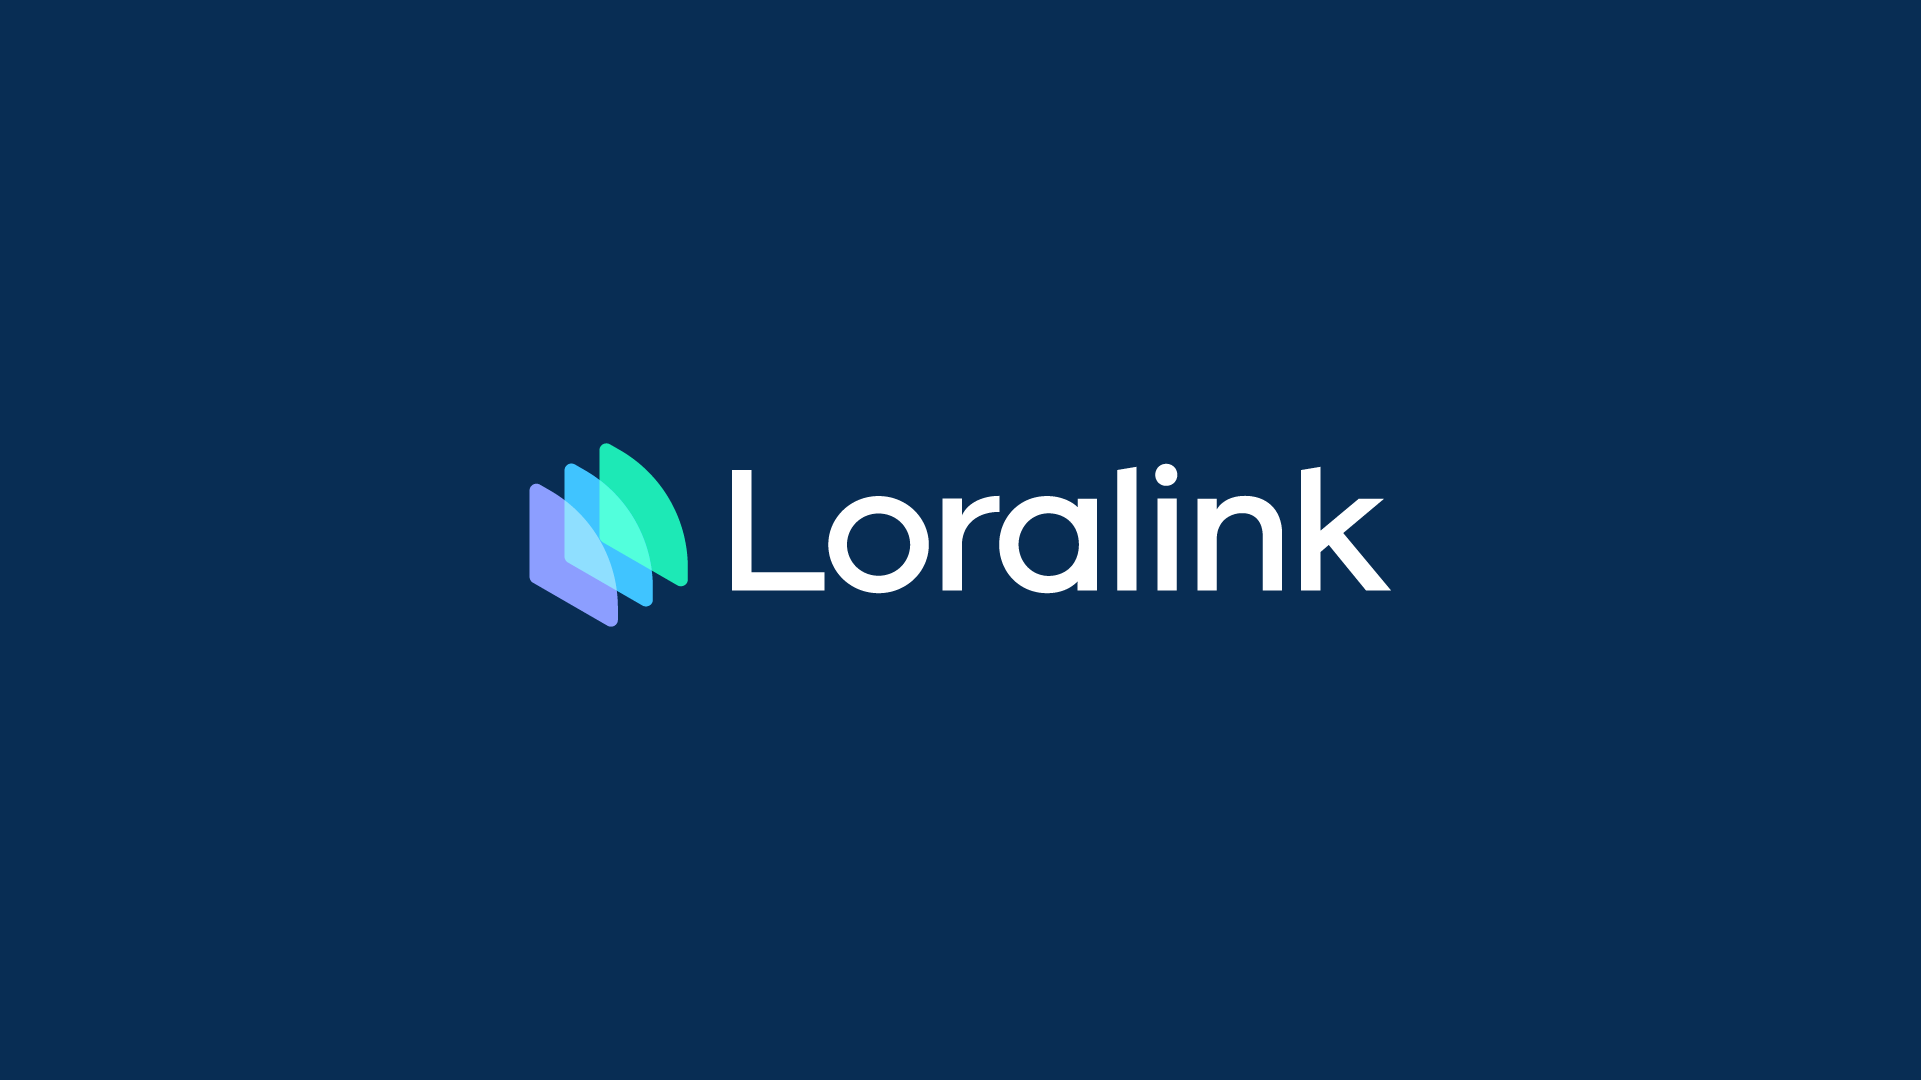 Loralink - New Wireless Network logo, letter 'L' with three waves, symbolizing connectivity and seamless wireless communication